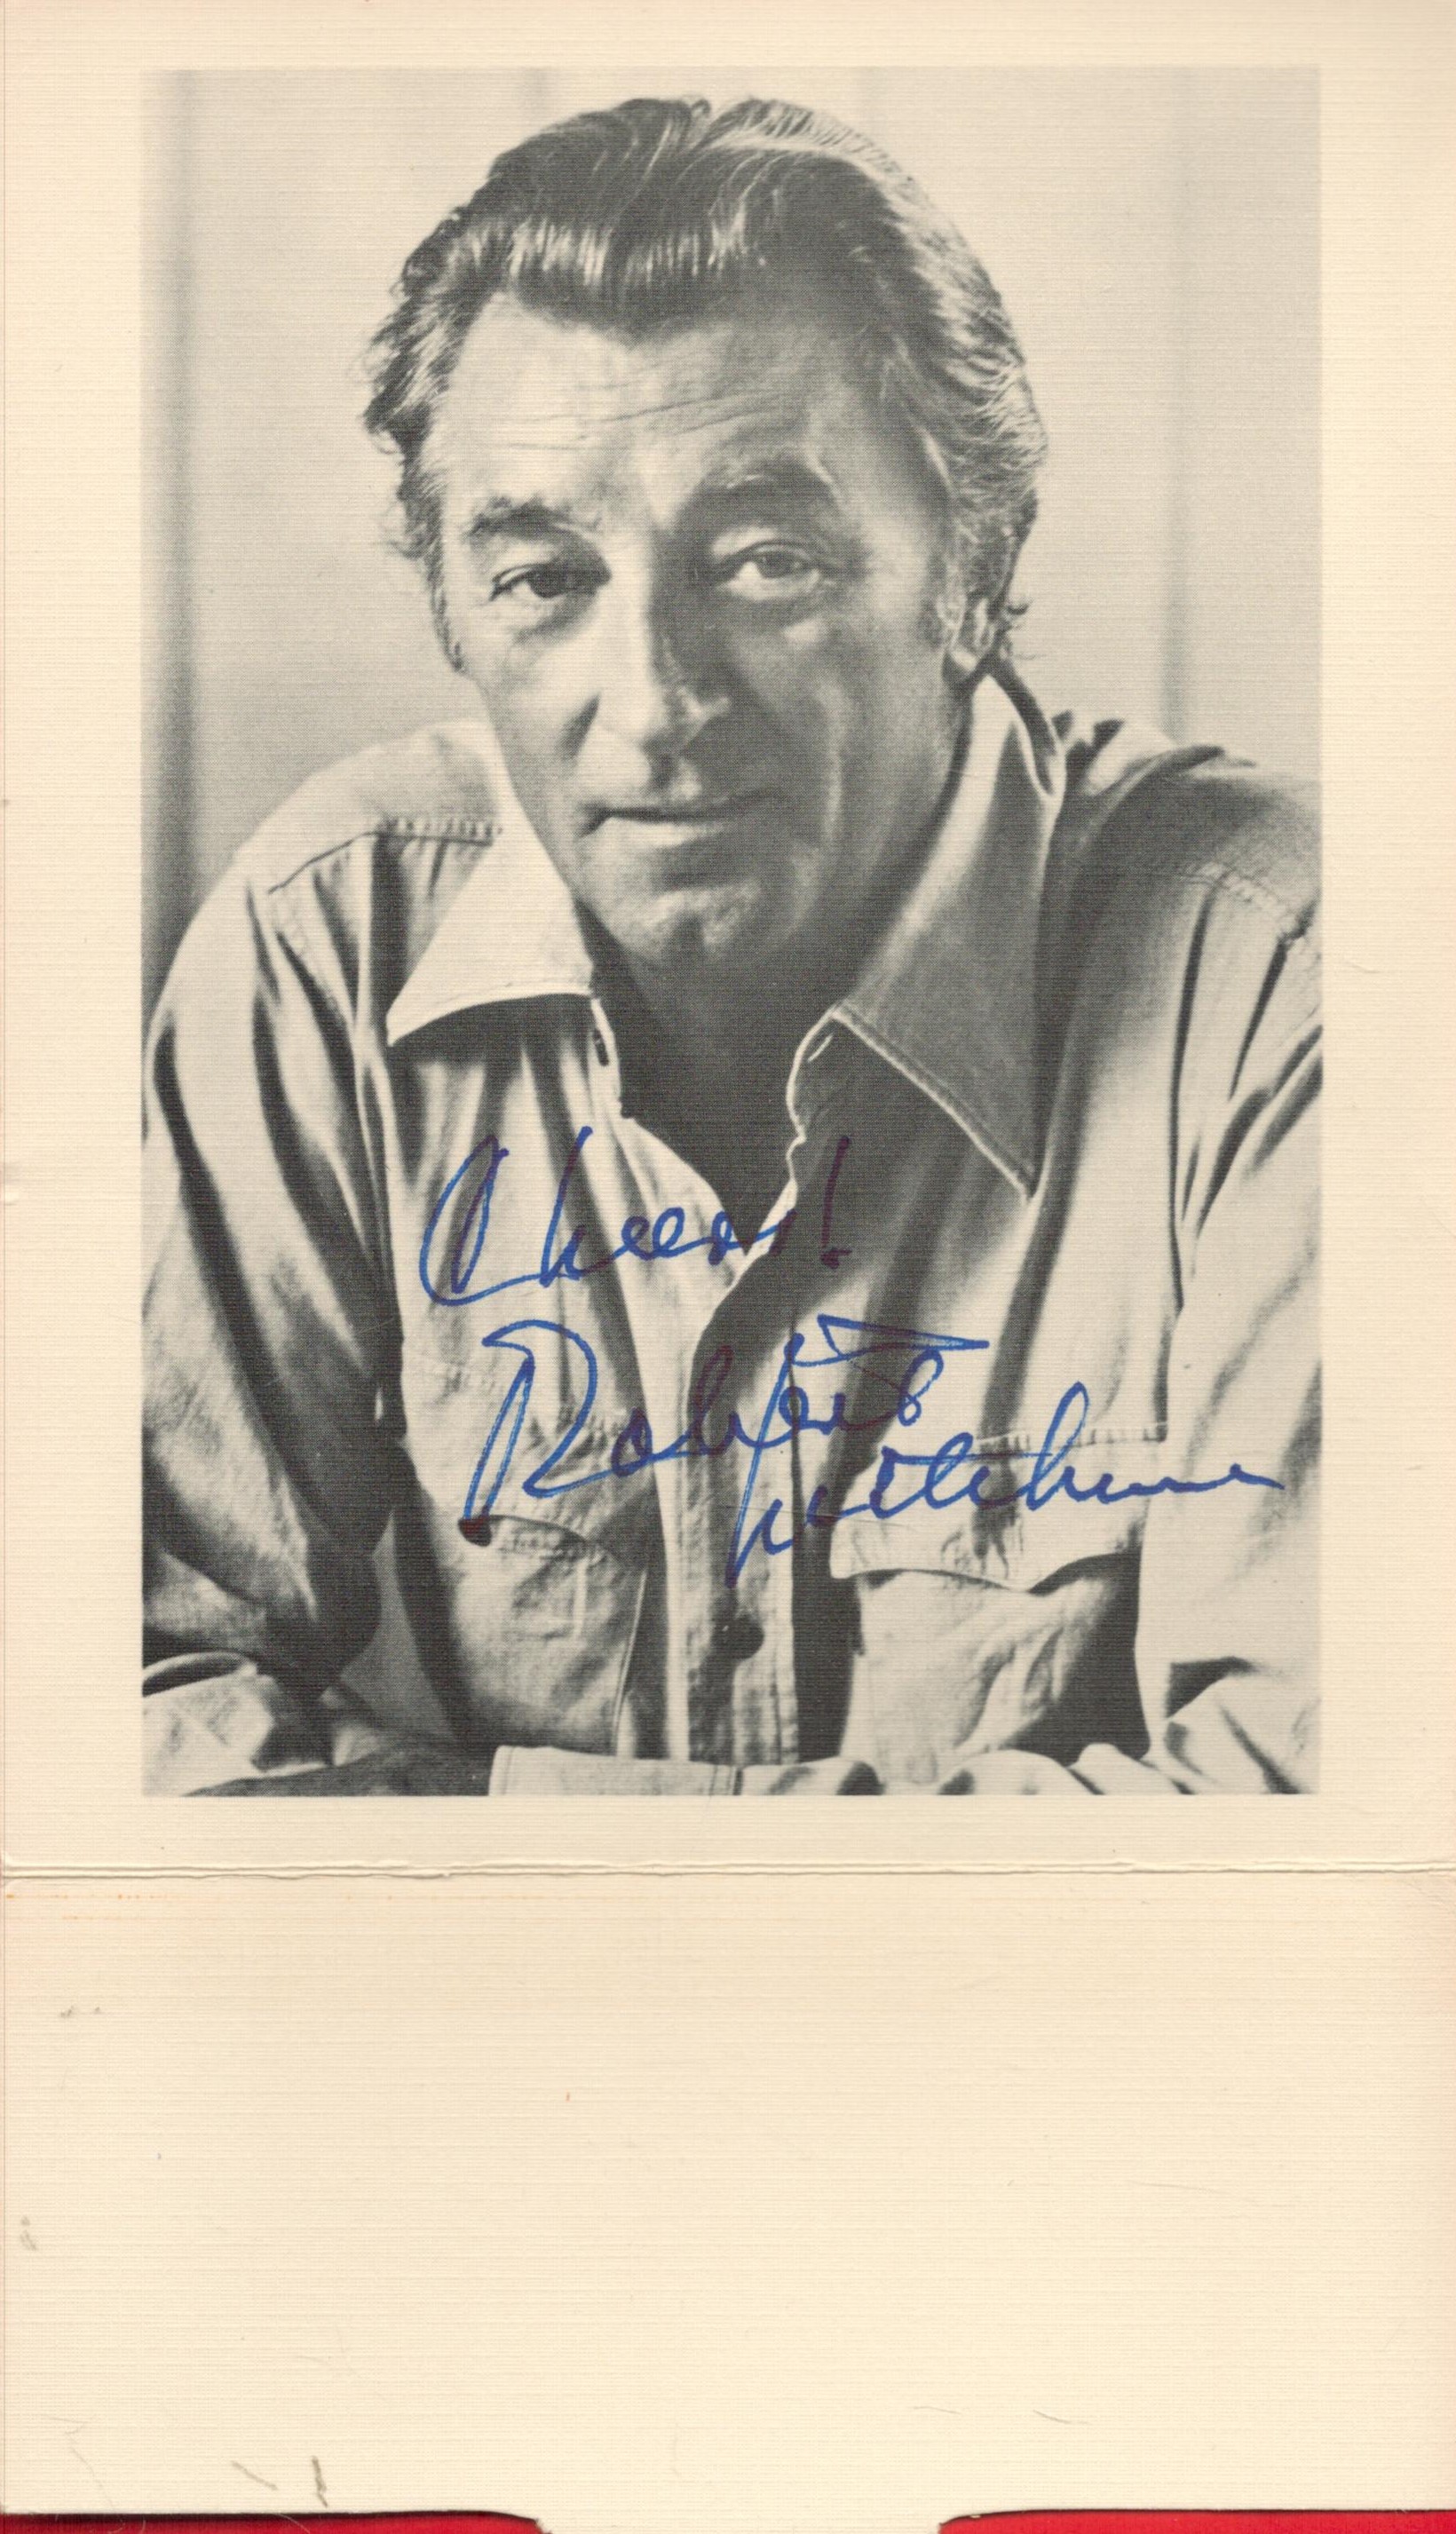 Robert Mitchum Signed Black and White Image in Folded Envelope Sent From USA in 1983. Signed in blue